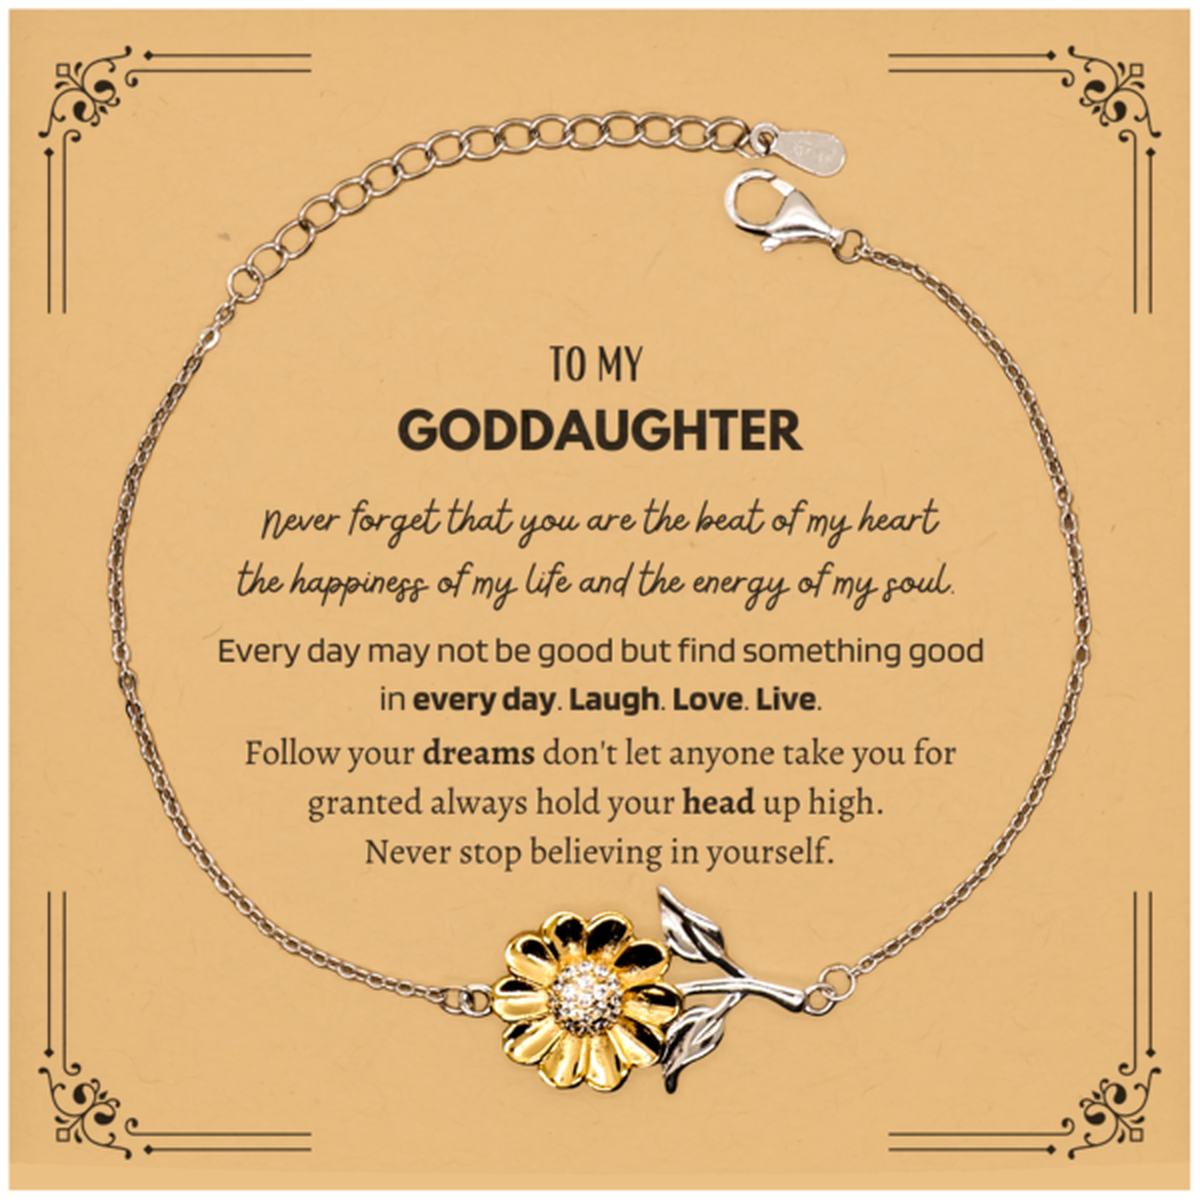 To My Goddaughter Message Card Gifts, Christmas Goddaughter Sunflower Bracelet Present, Birthday Unique Motivational For Goddaughter, To My Goddaughter Never forget that you are the beat of my heart the happiness of my life and the energy of my soul